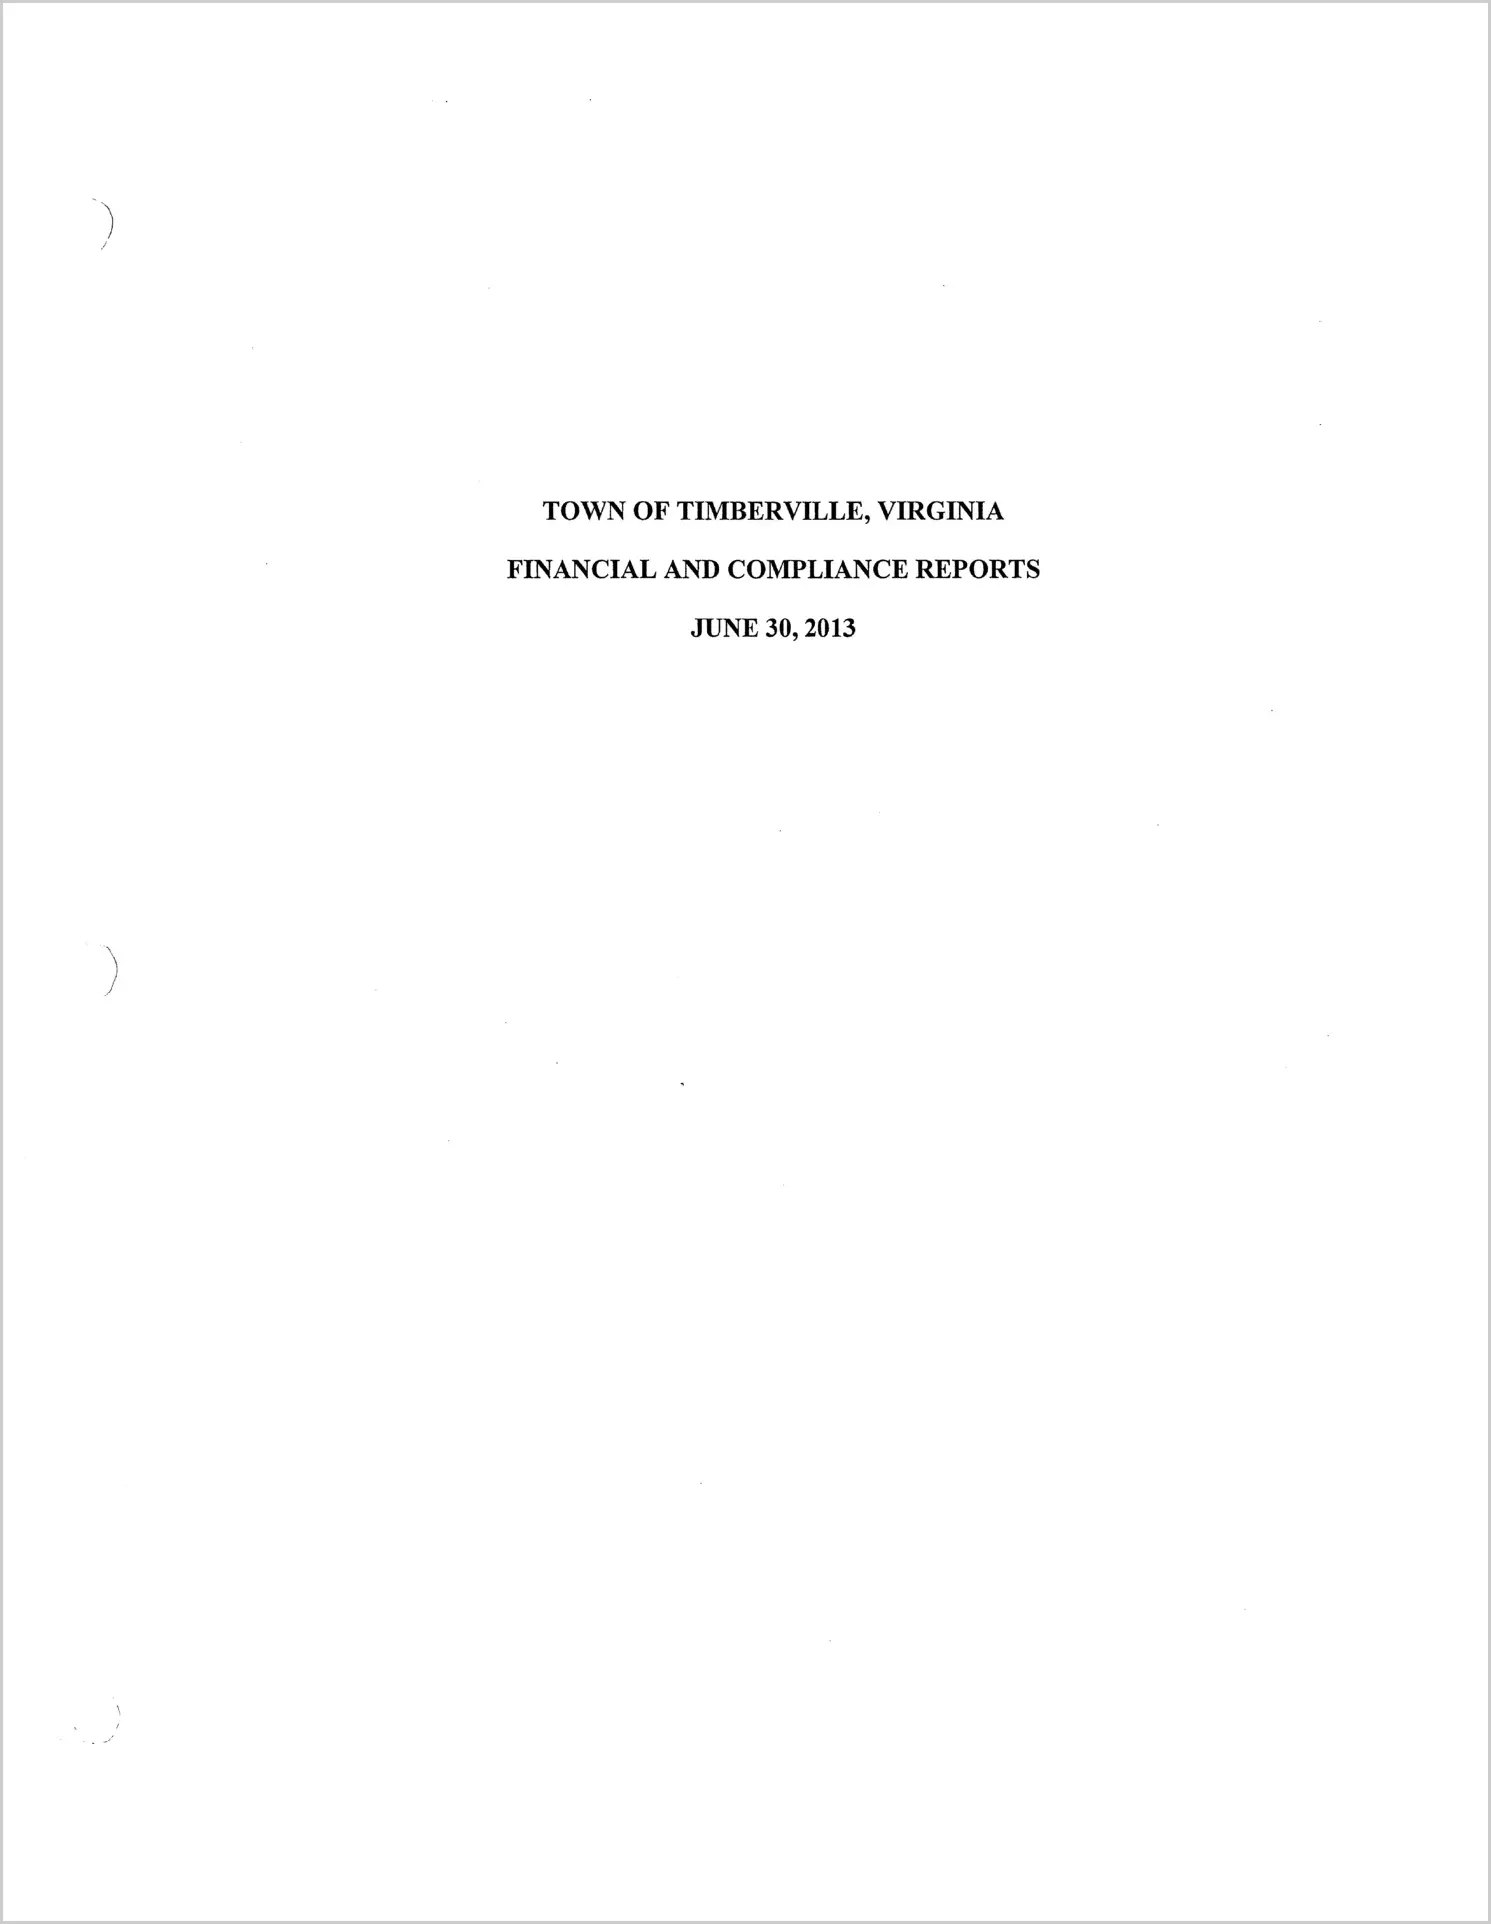 2013 Annual Financial Report for Town of Timberville